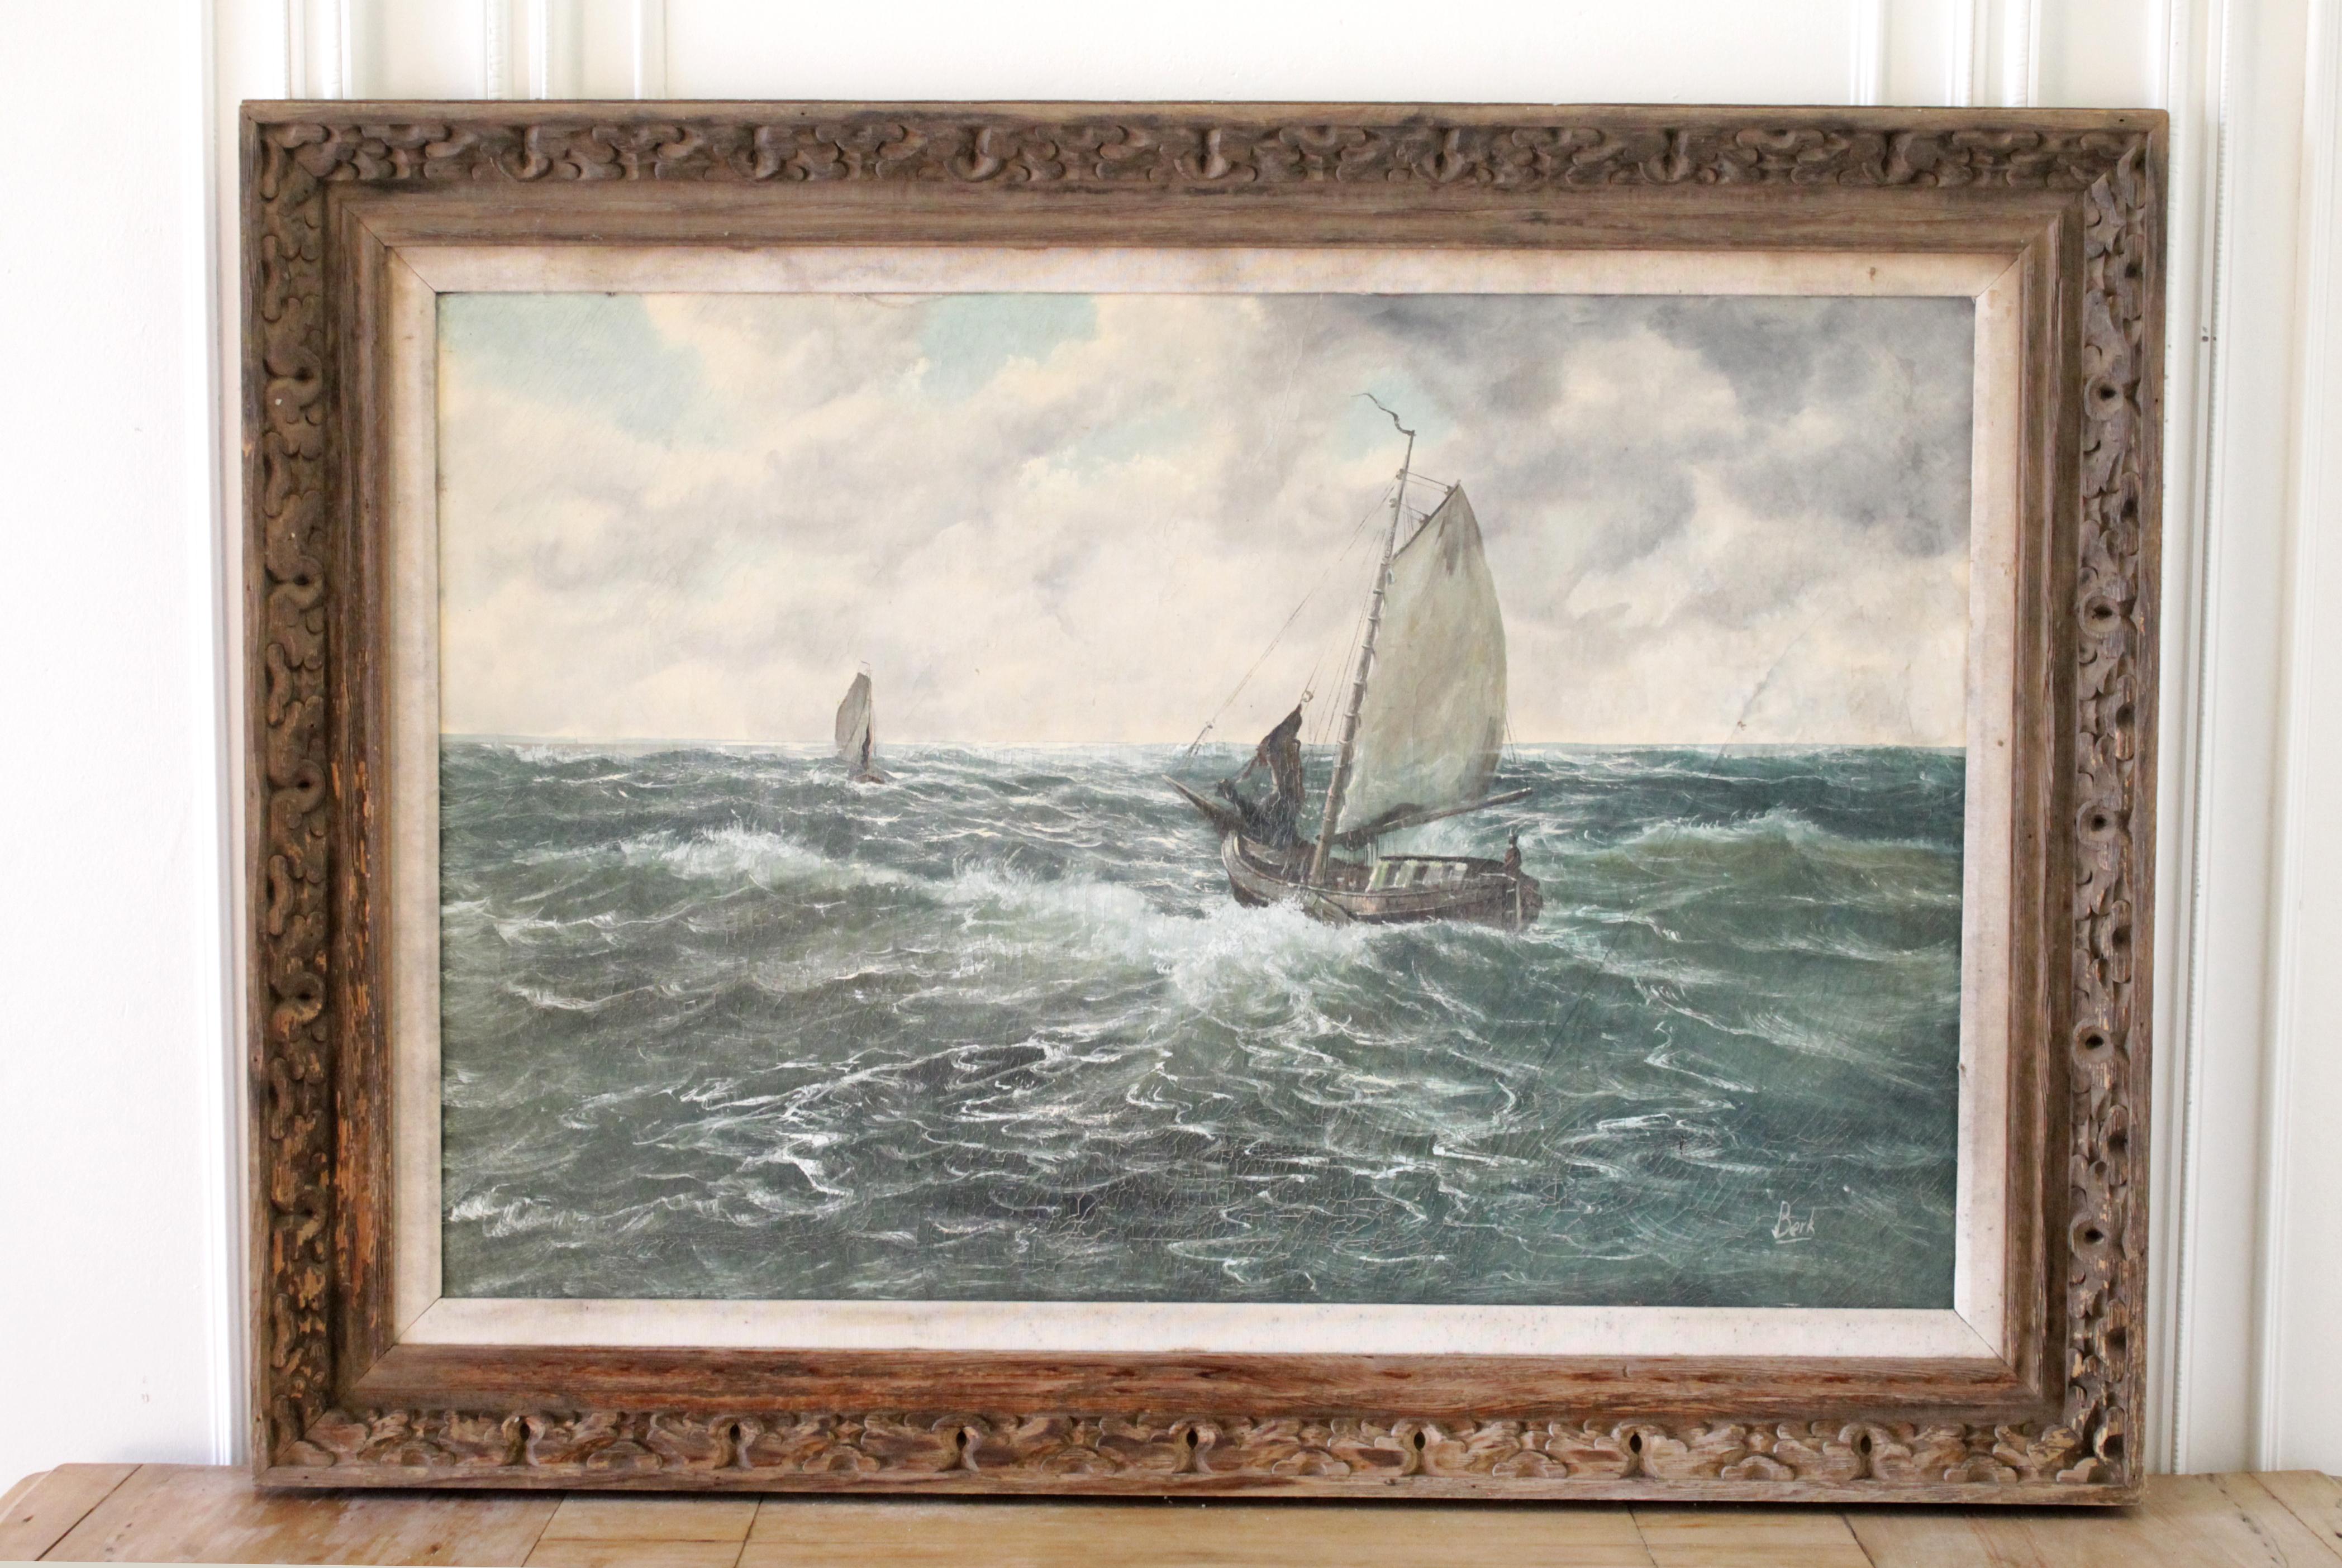 Early 20th century antique oil painting of a Sailboat by Berk
Oil painting has some wear, the whole canvas has a crackled appearance, and there is a small puncture to the right near signature.
Beautiful antique patina, and framed in a wood and